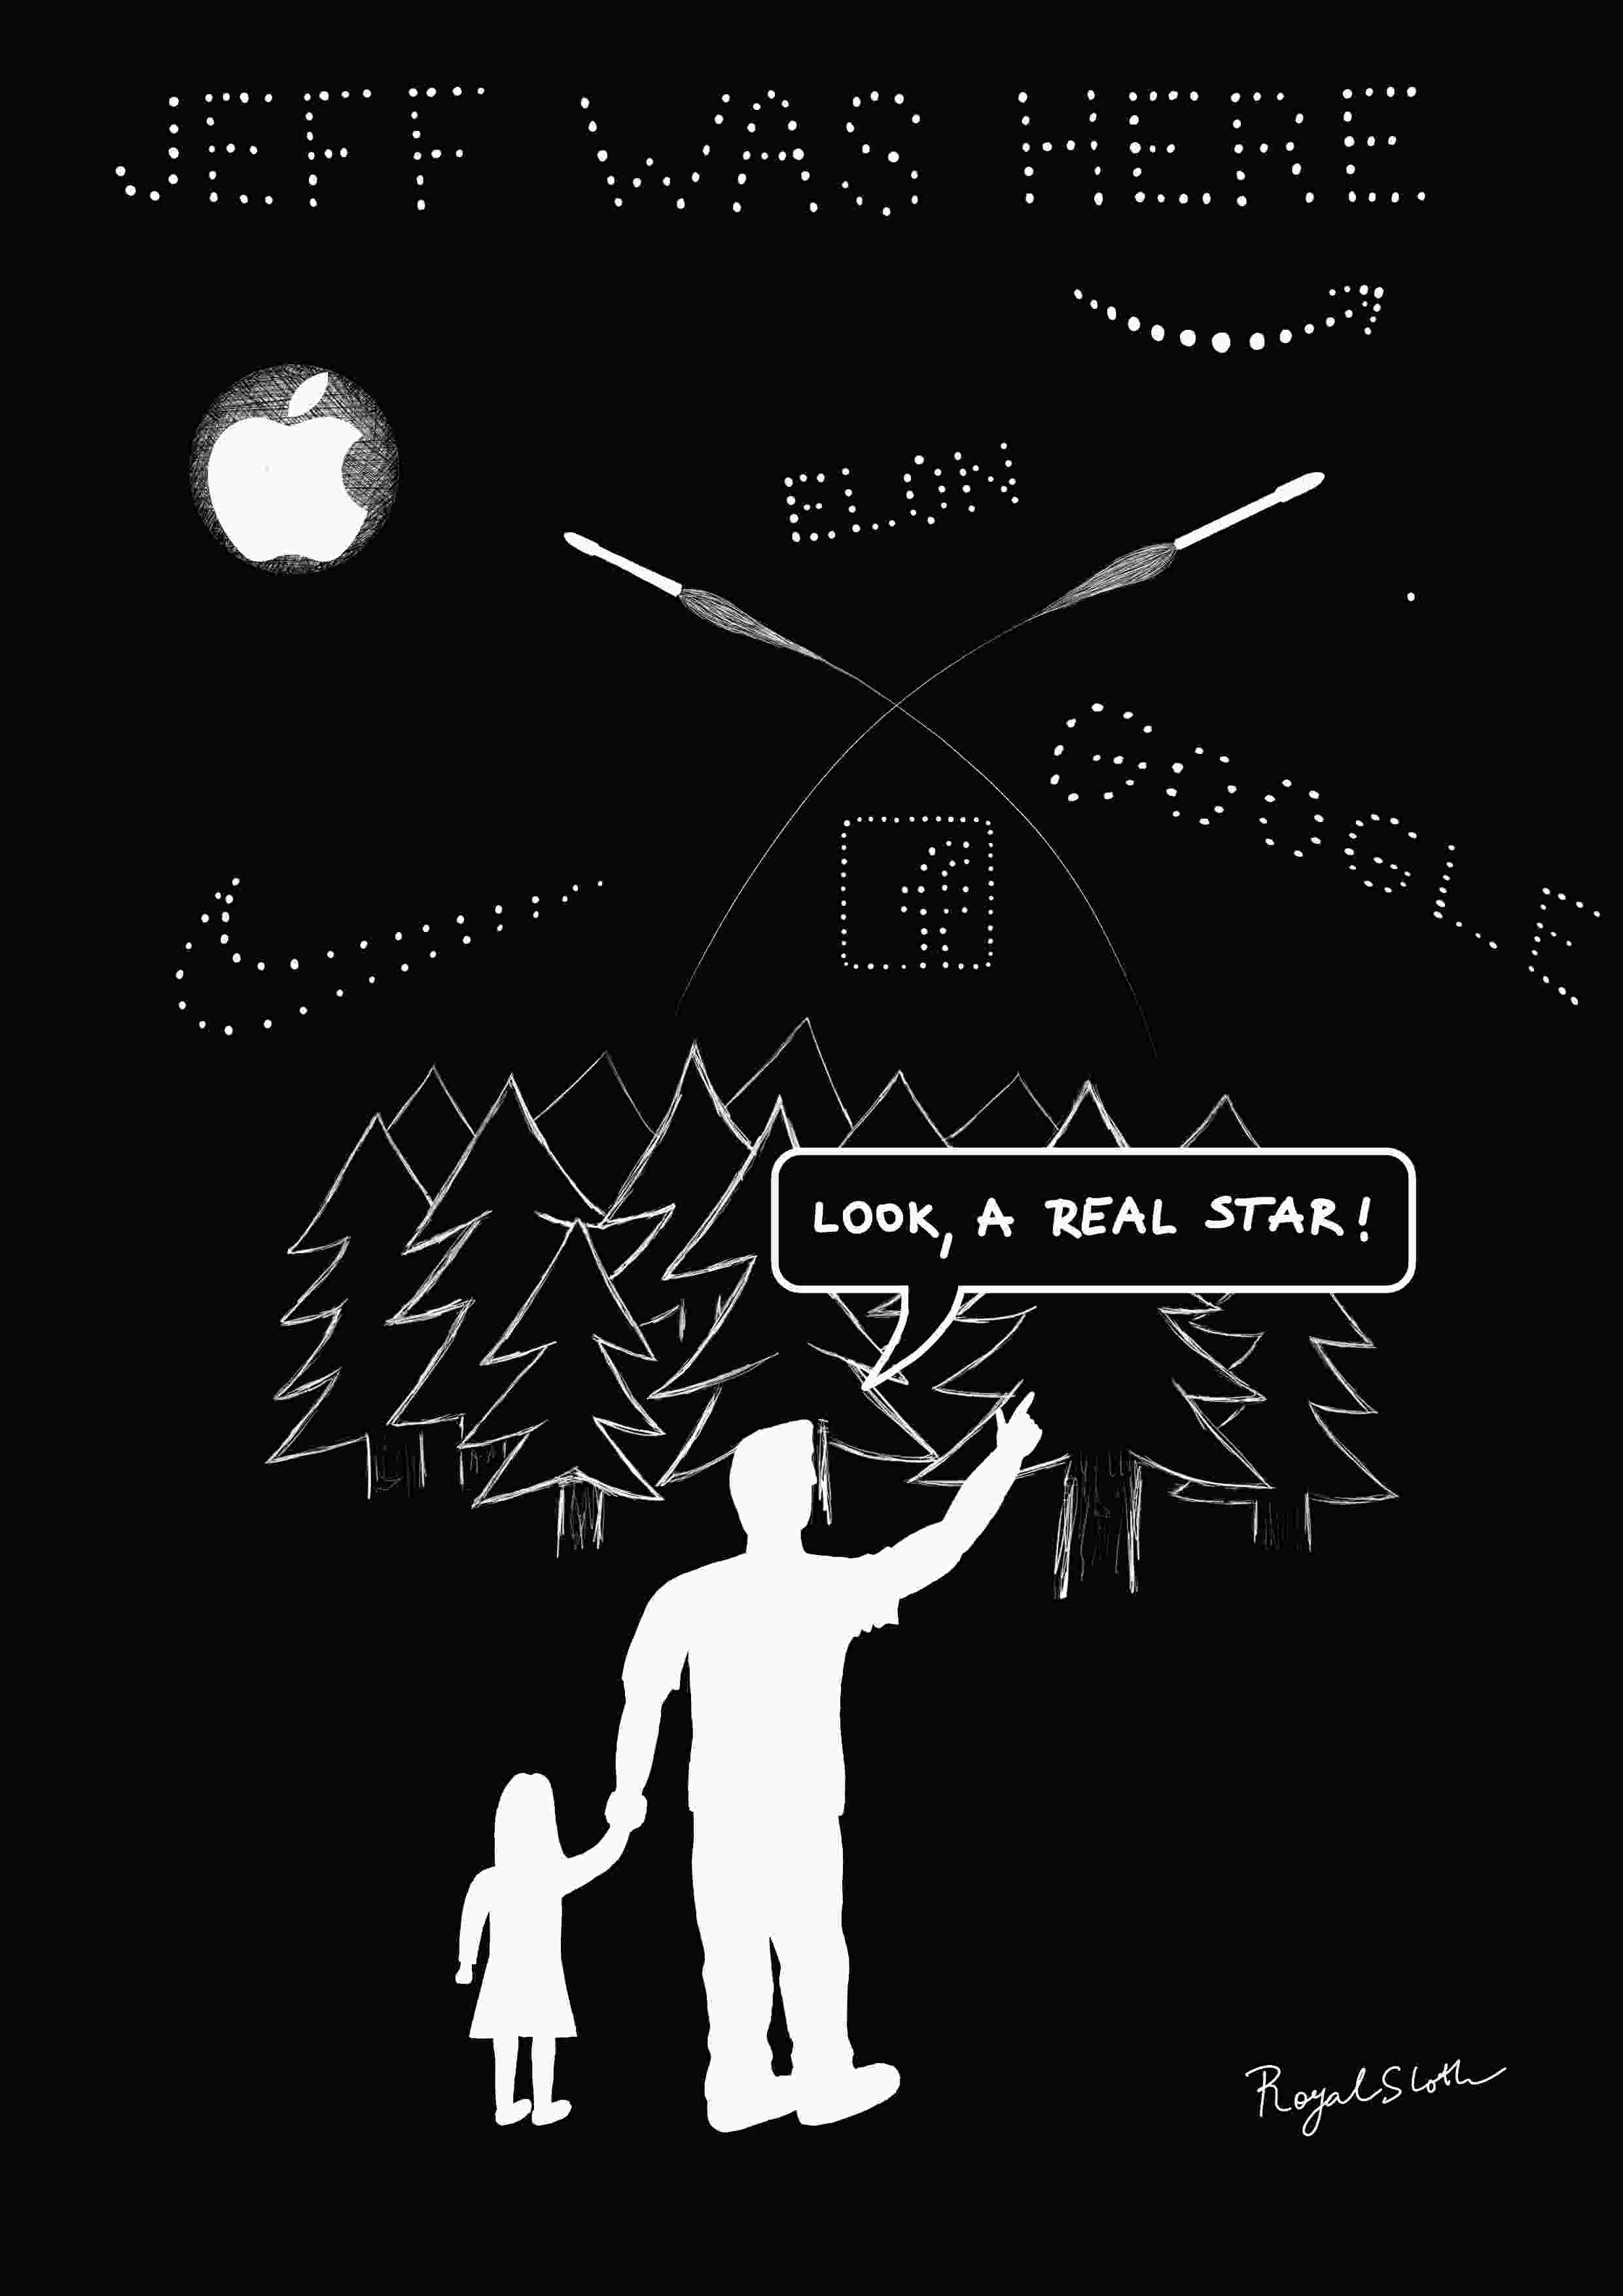 A father and his daughter are in the forest at night staring into the sky. The father says: “Look a real star!”while they are being blinded by the artificial stars - advertisments for the big companies. The ads are showing: Jeff was here,Amazon logo, Google logo, Facebook logo, Nike logo, Elon and the full moon that was turned into the Apple’s logo.